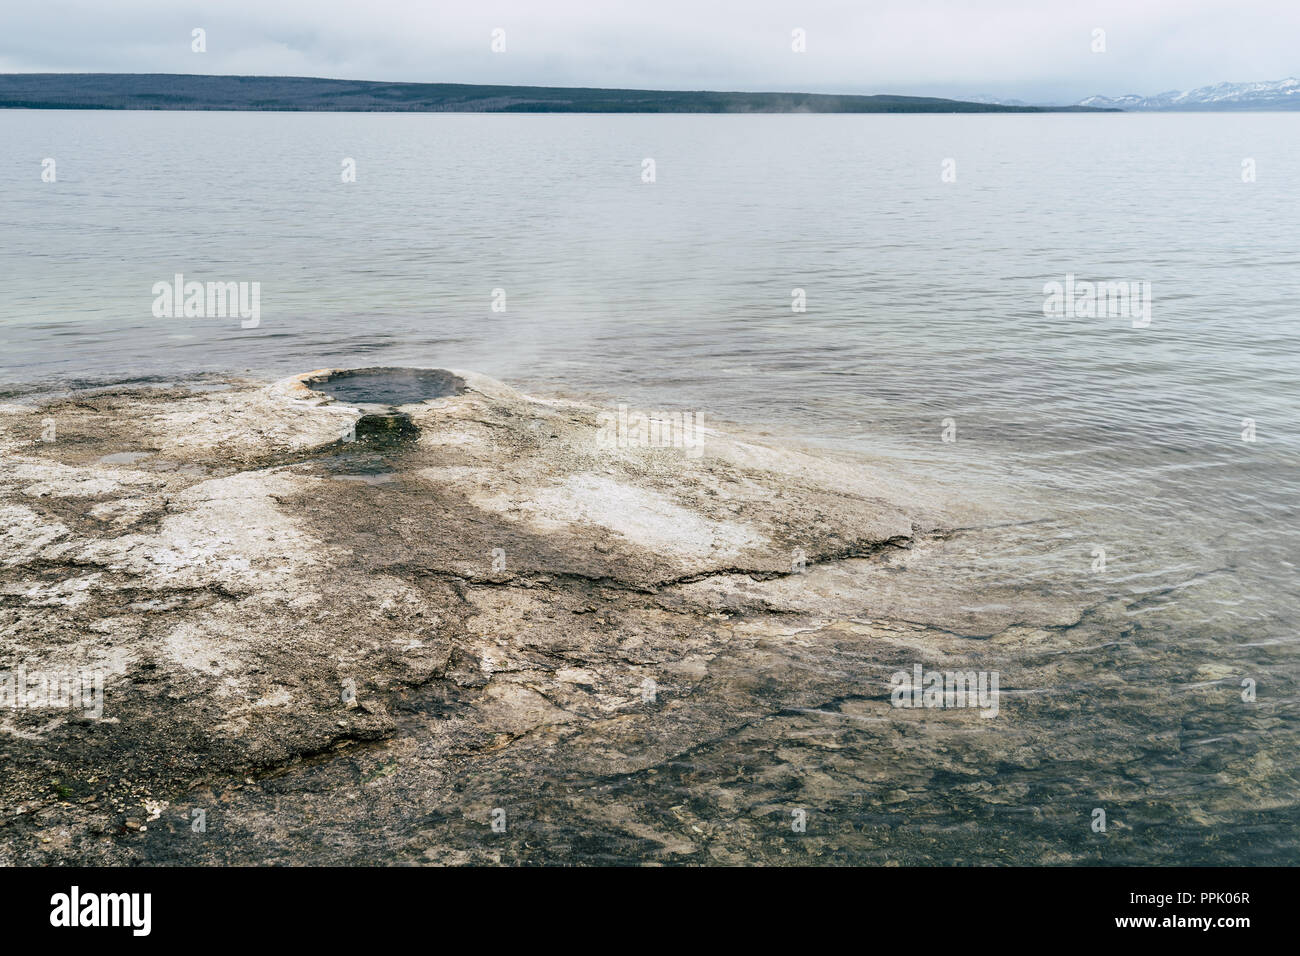 Big Cone Geyer, also known as Fishing Hole in Yellowstone Lake is